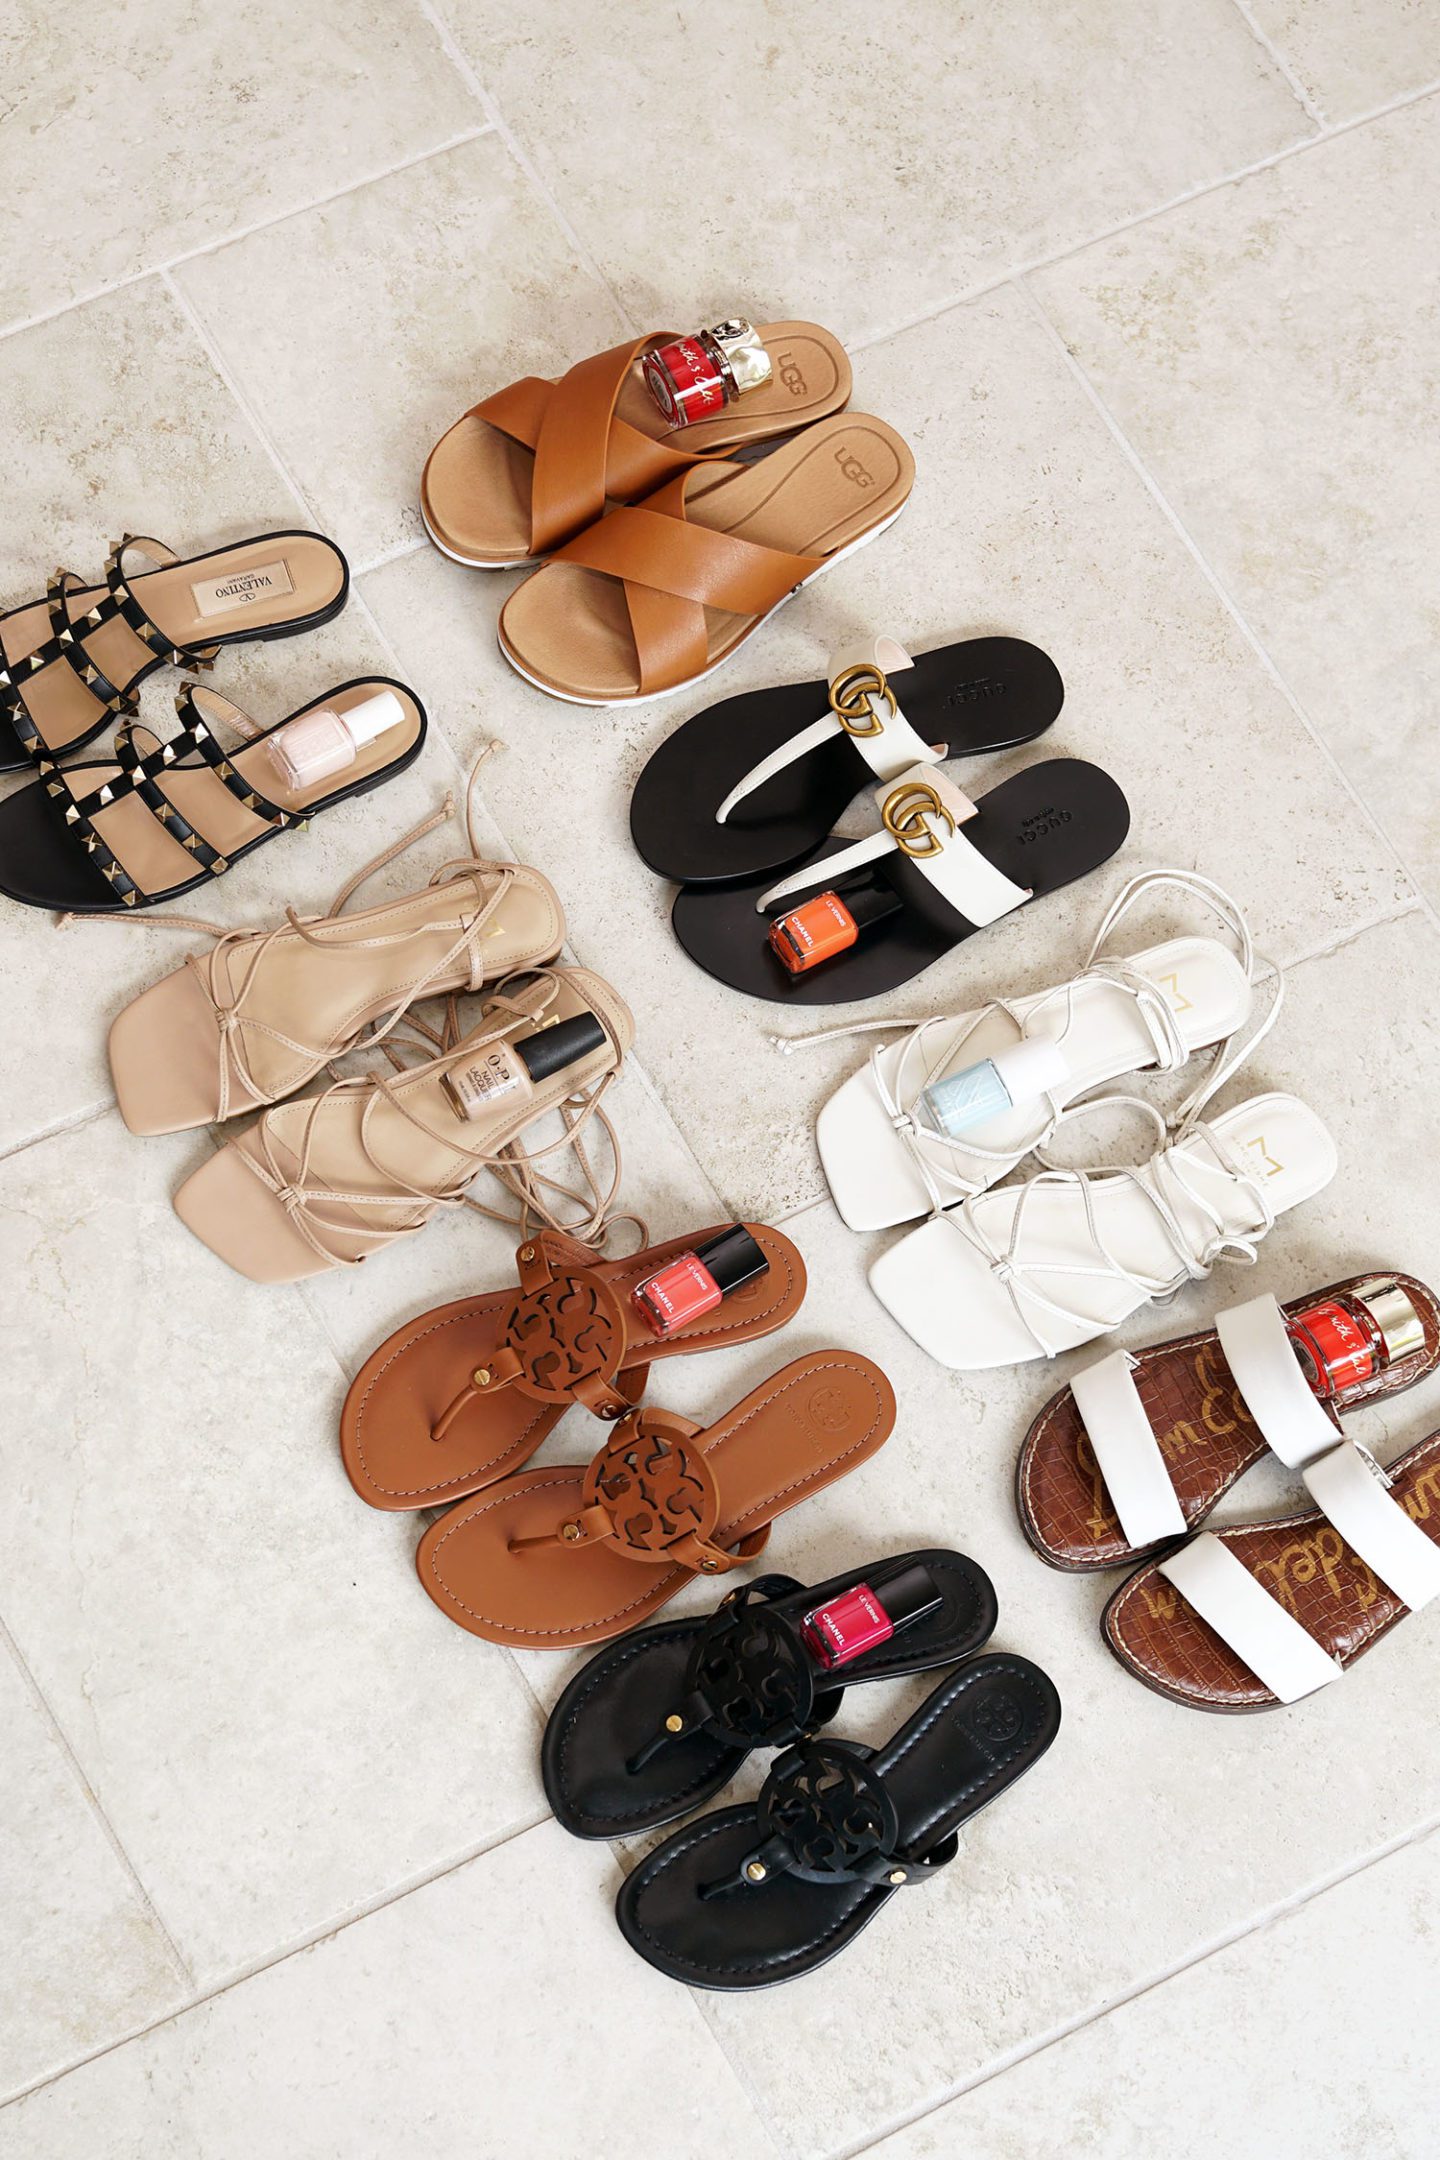 Favorite Summer Sandals + Polishes to Try